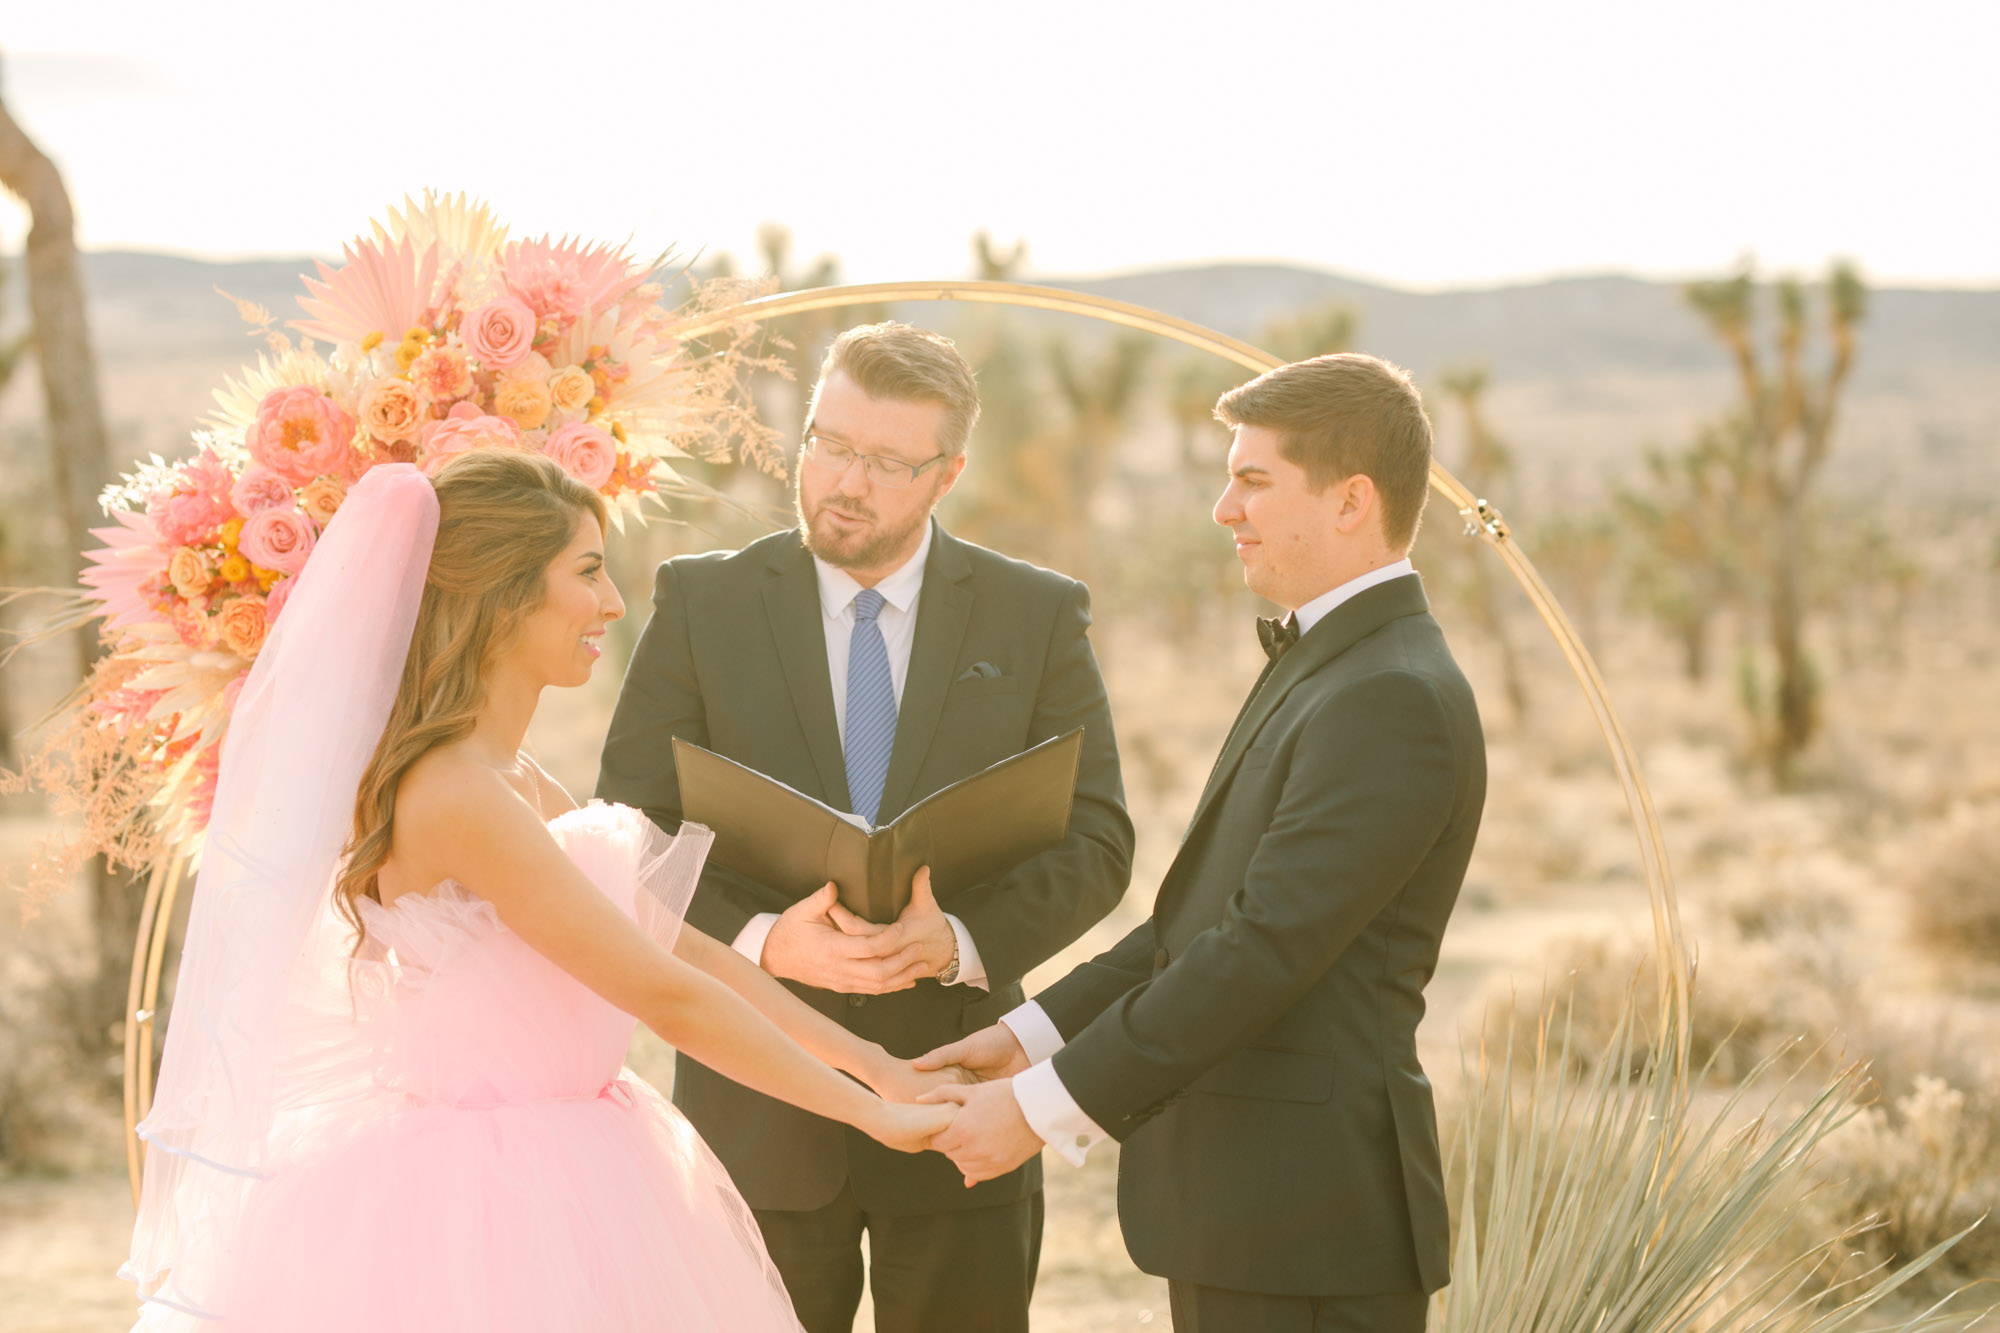 Bride and groom during elopement ceremony | Pink wedding dress Joshua Tree elopement featured on Green Wedding Shoes | Colorful desert wedding inspiration for fun-loving couples in Southern California #joshuatreewedding #joshuatreeelopement #pinkwedding #greenweddingshoes Source: Mary Costa Photography | Los Angeles